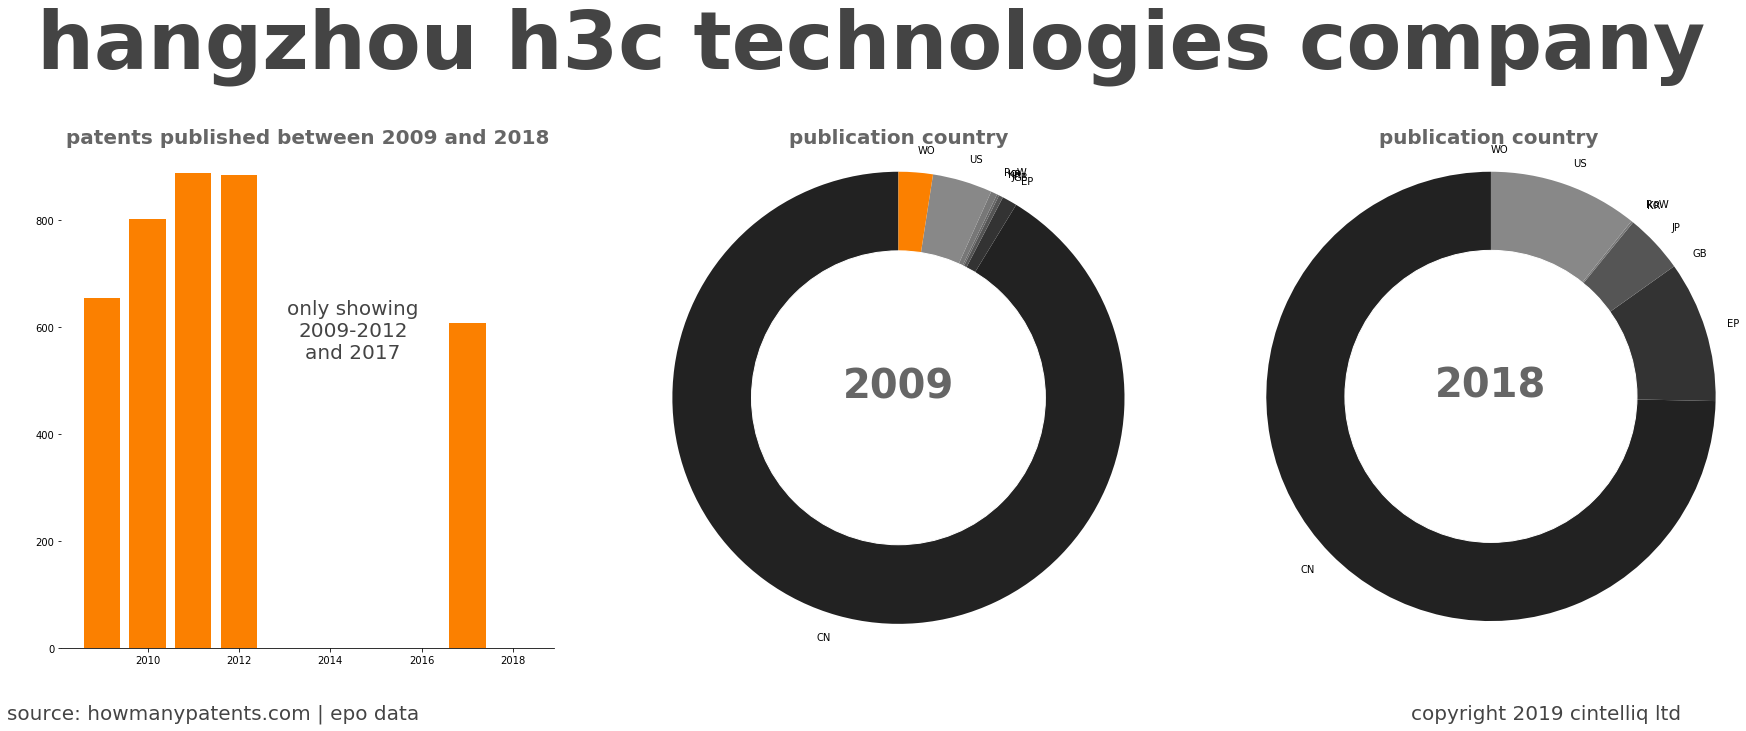 summary of patents for Hangzhou H3C Technologies Company